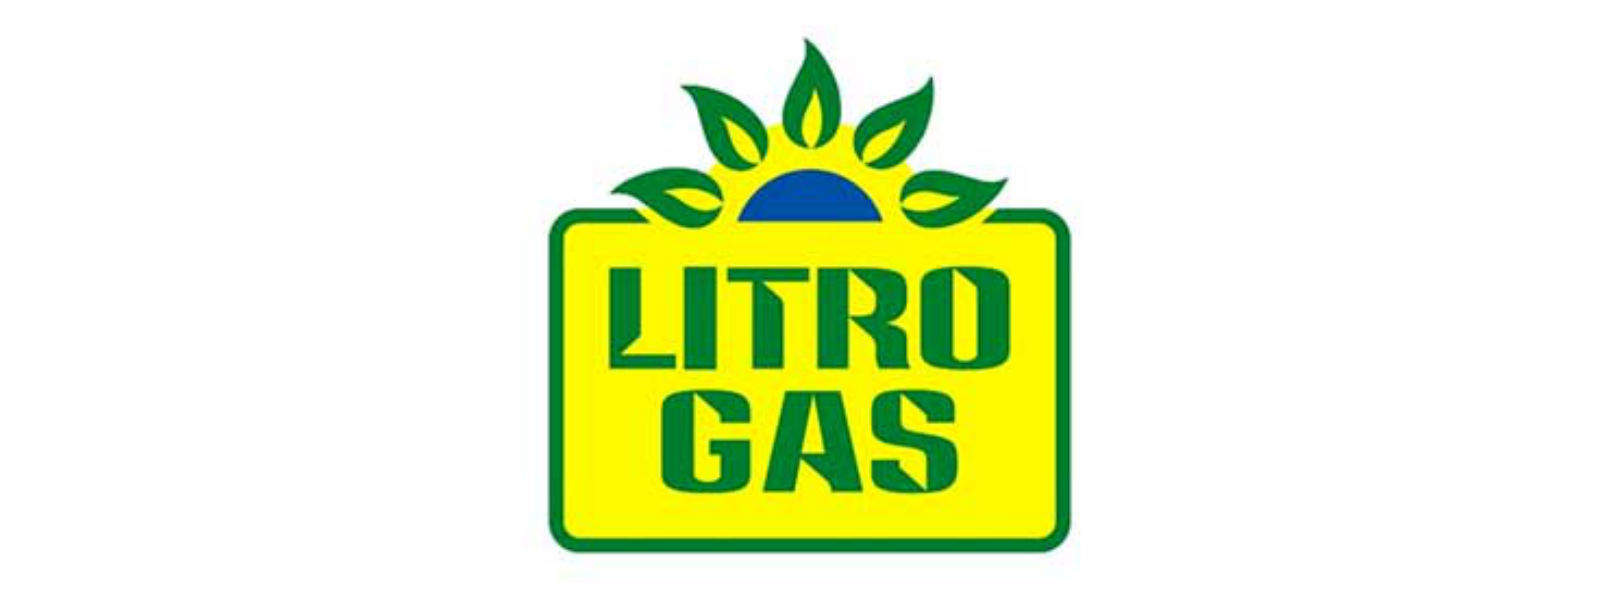 SLIC Chairman appointed as Litro Gas Chairman